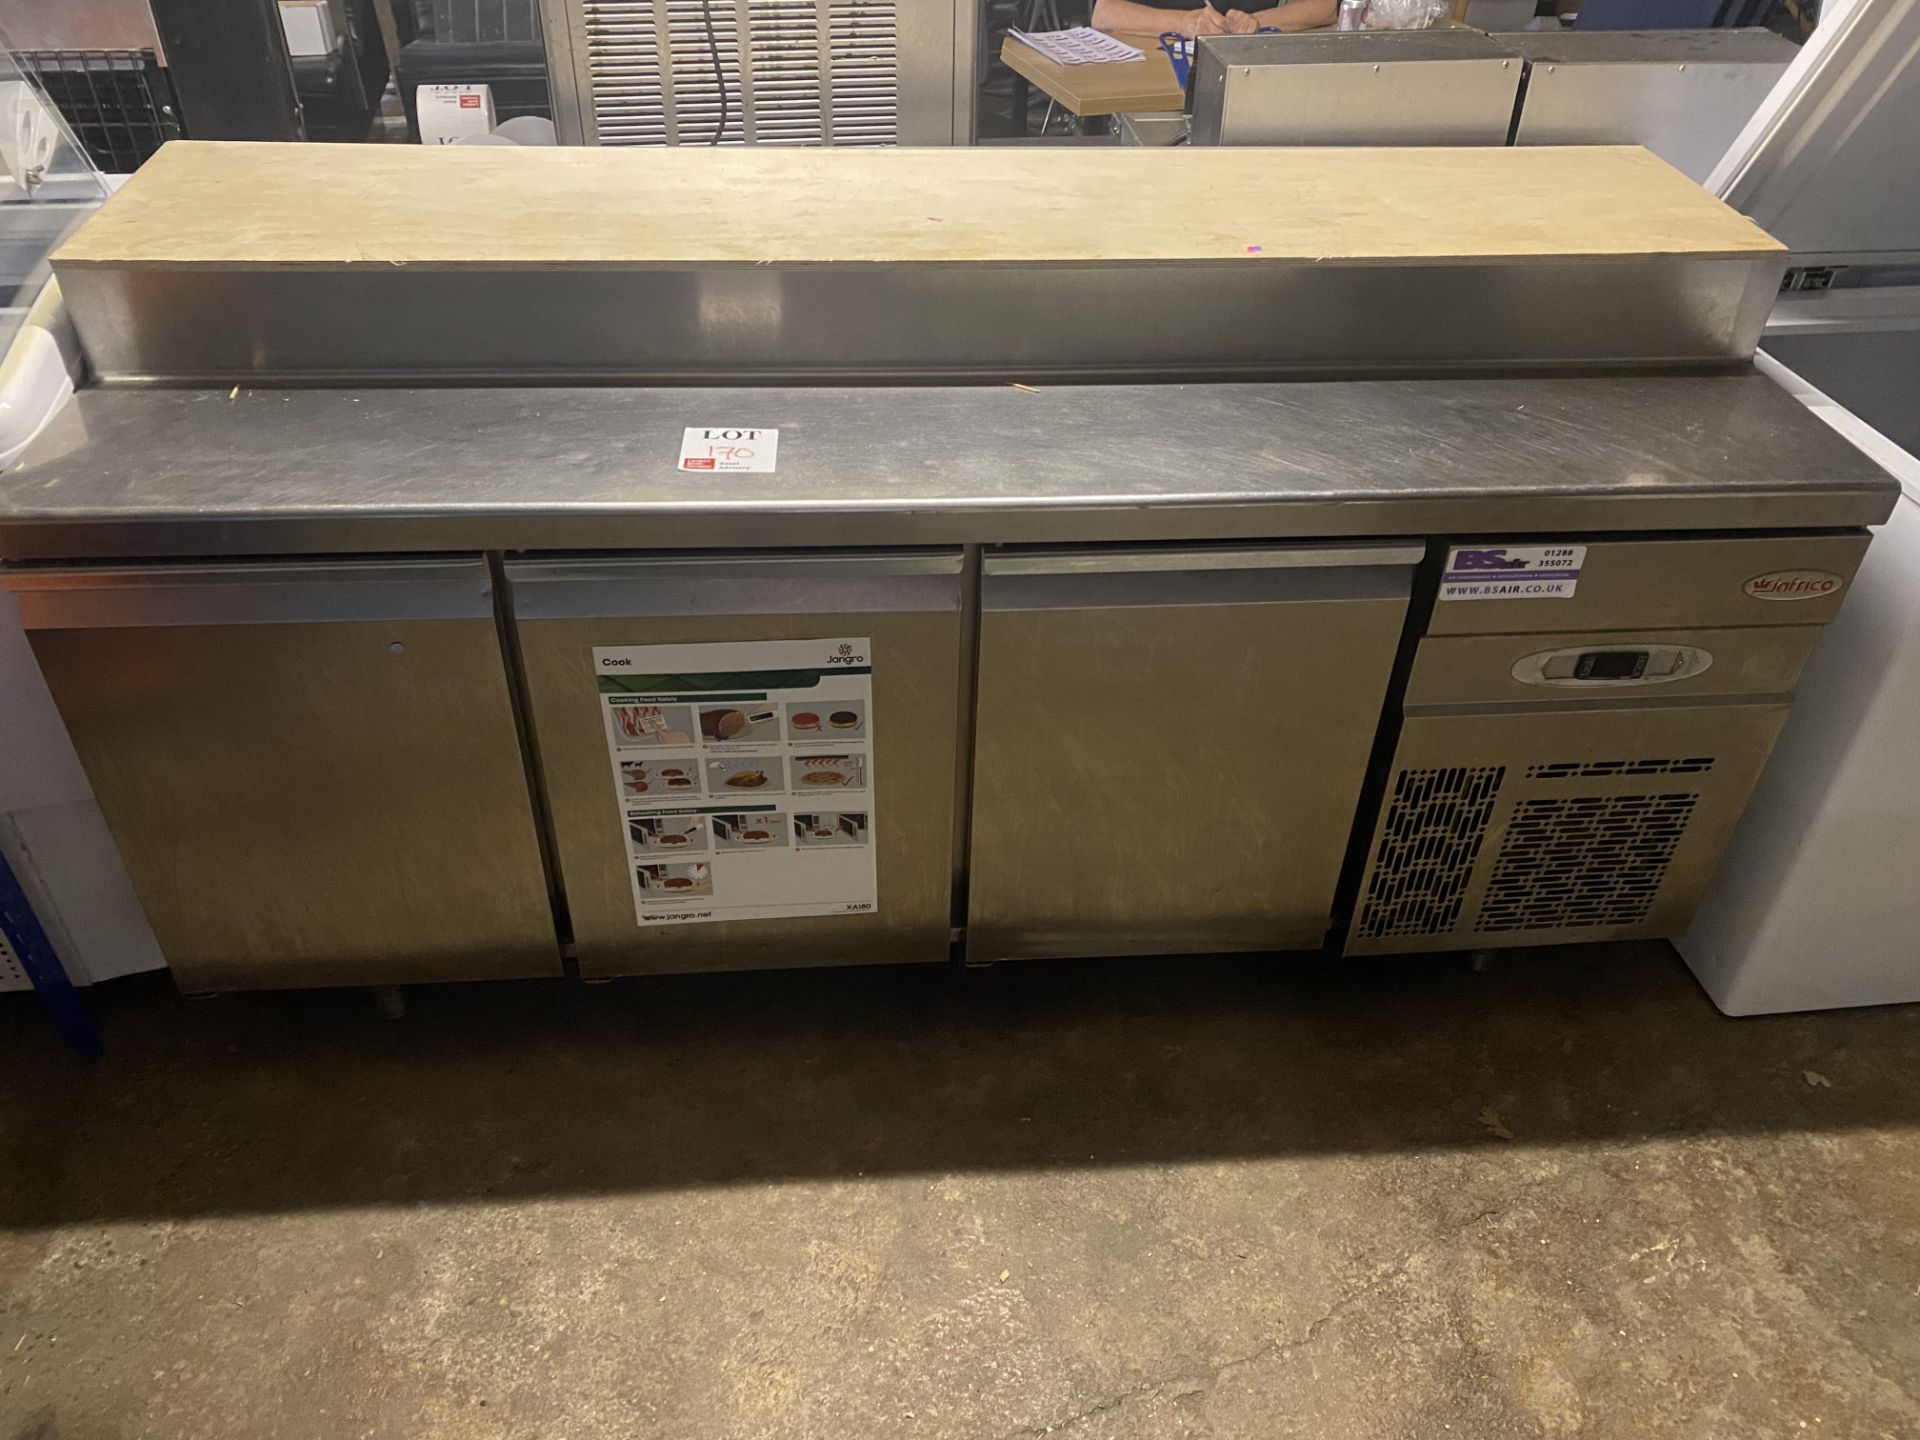 Infrico stainless steel workbench with under counter refrigeration, model BMGN1960EN, approx 85 x